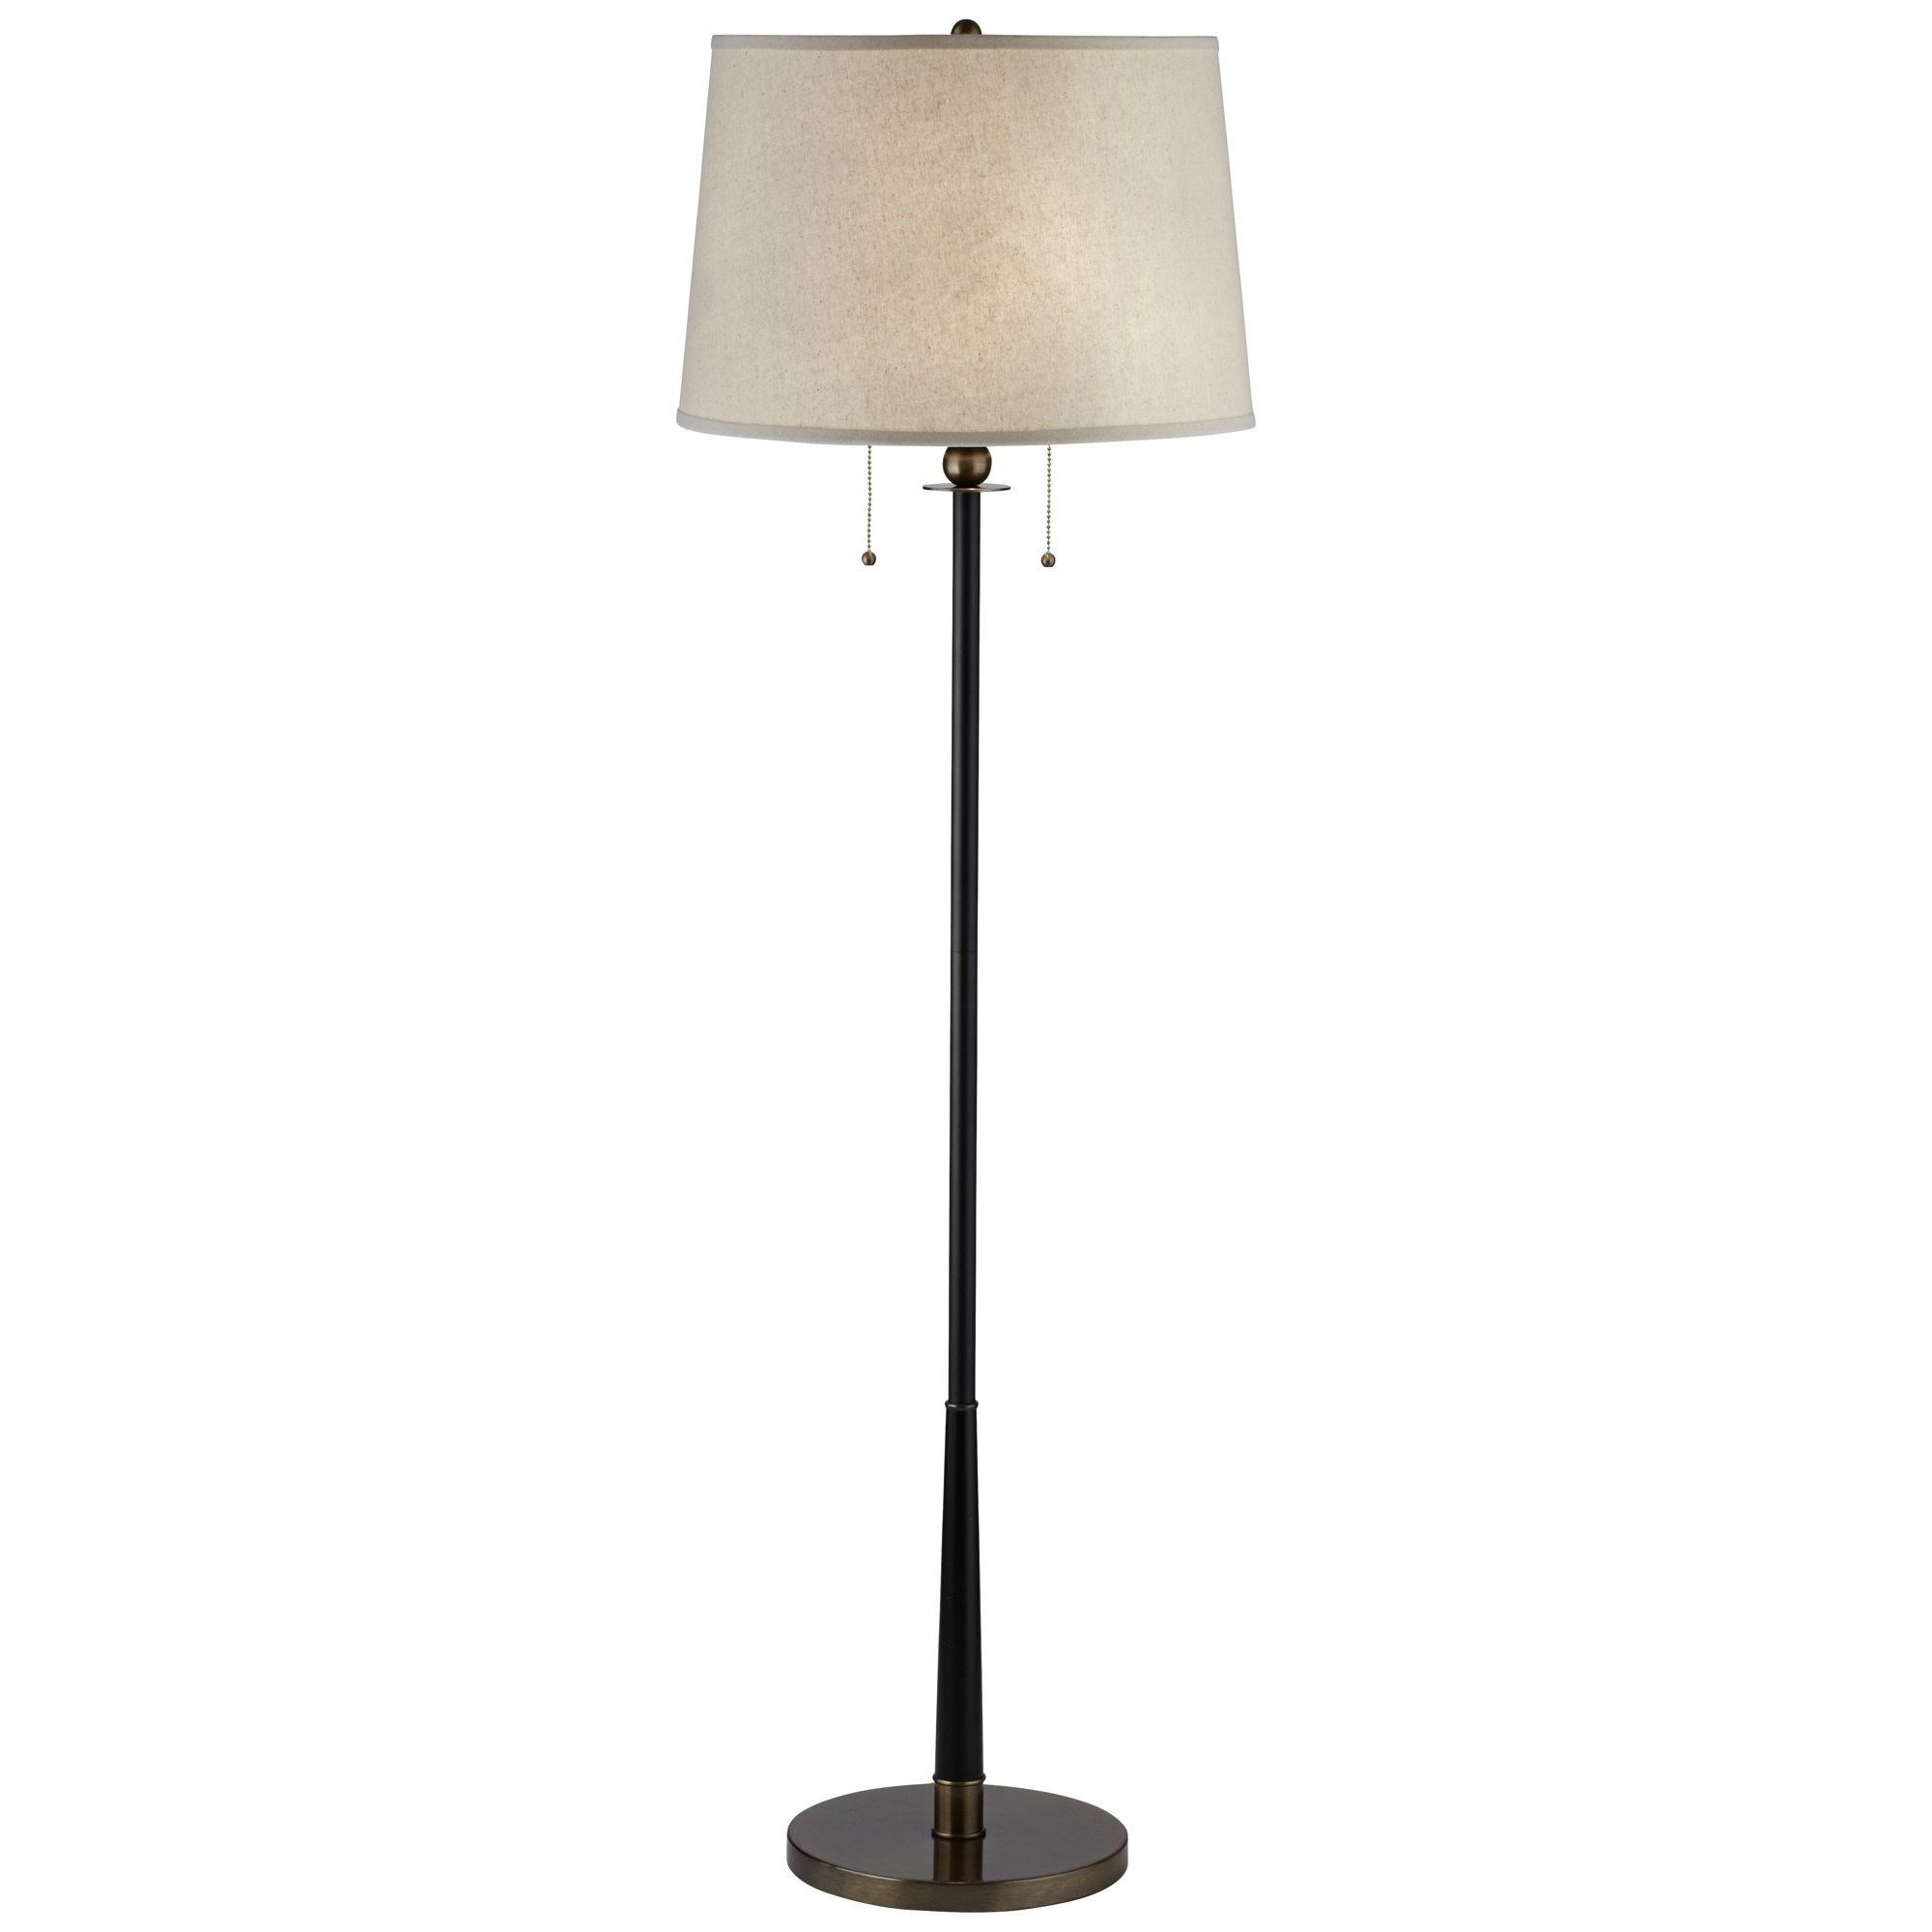 Pacific Coast Lighting Kathy Ireland Ovation Table Lamp Echo intended for proportions 2000 X 2000